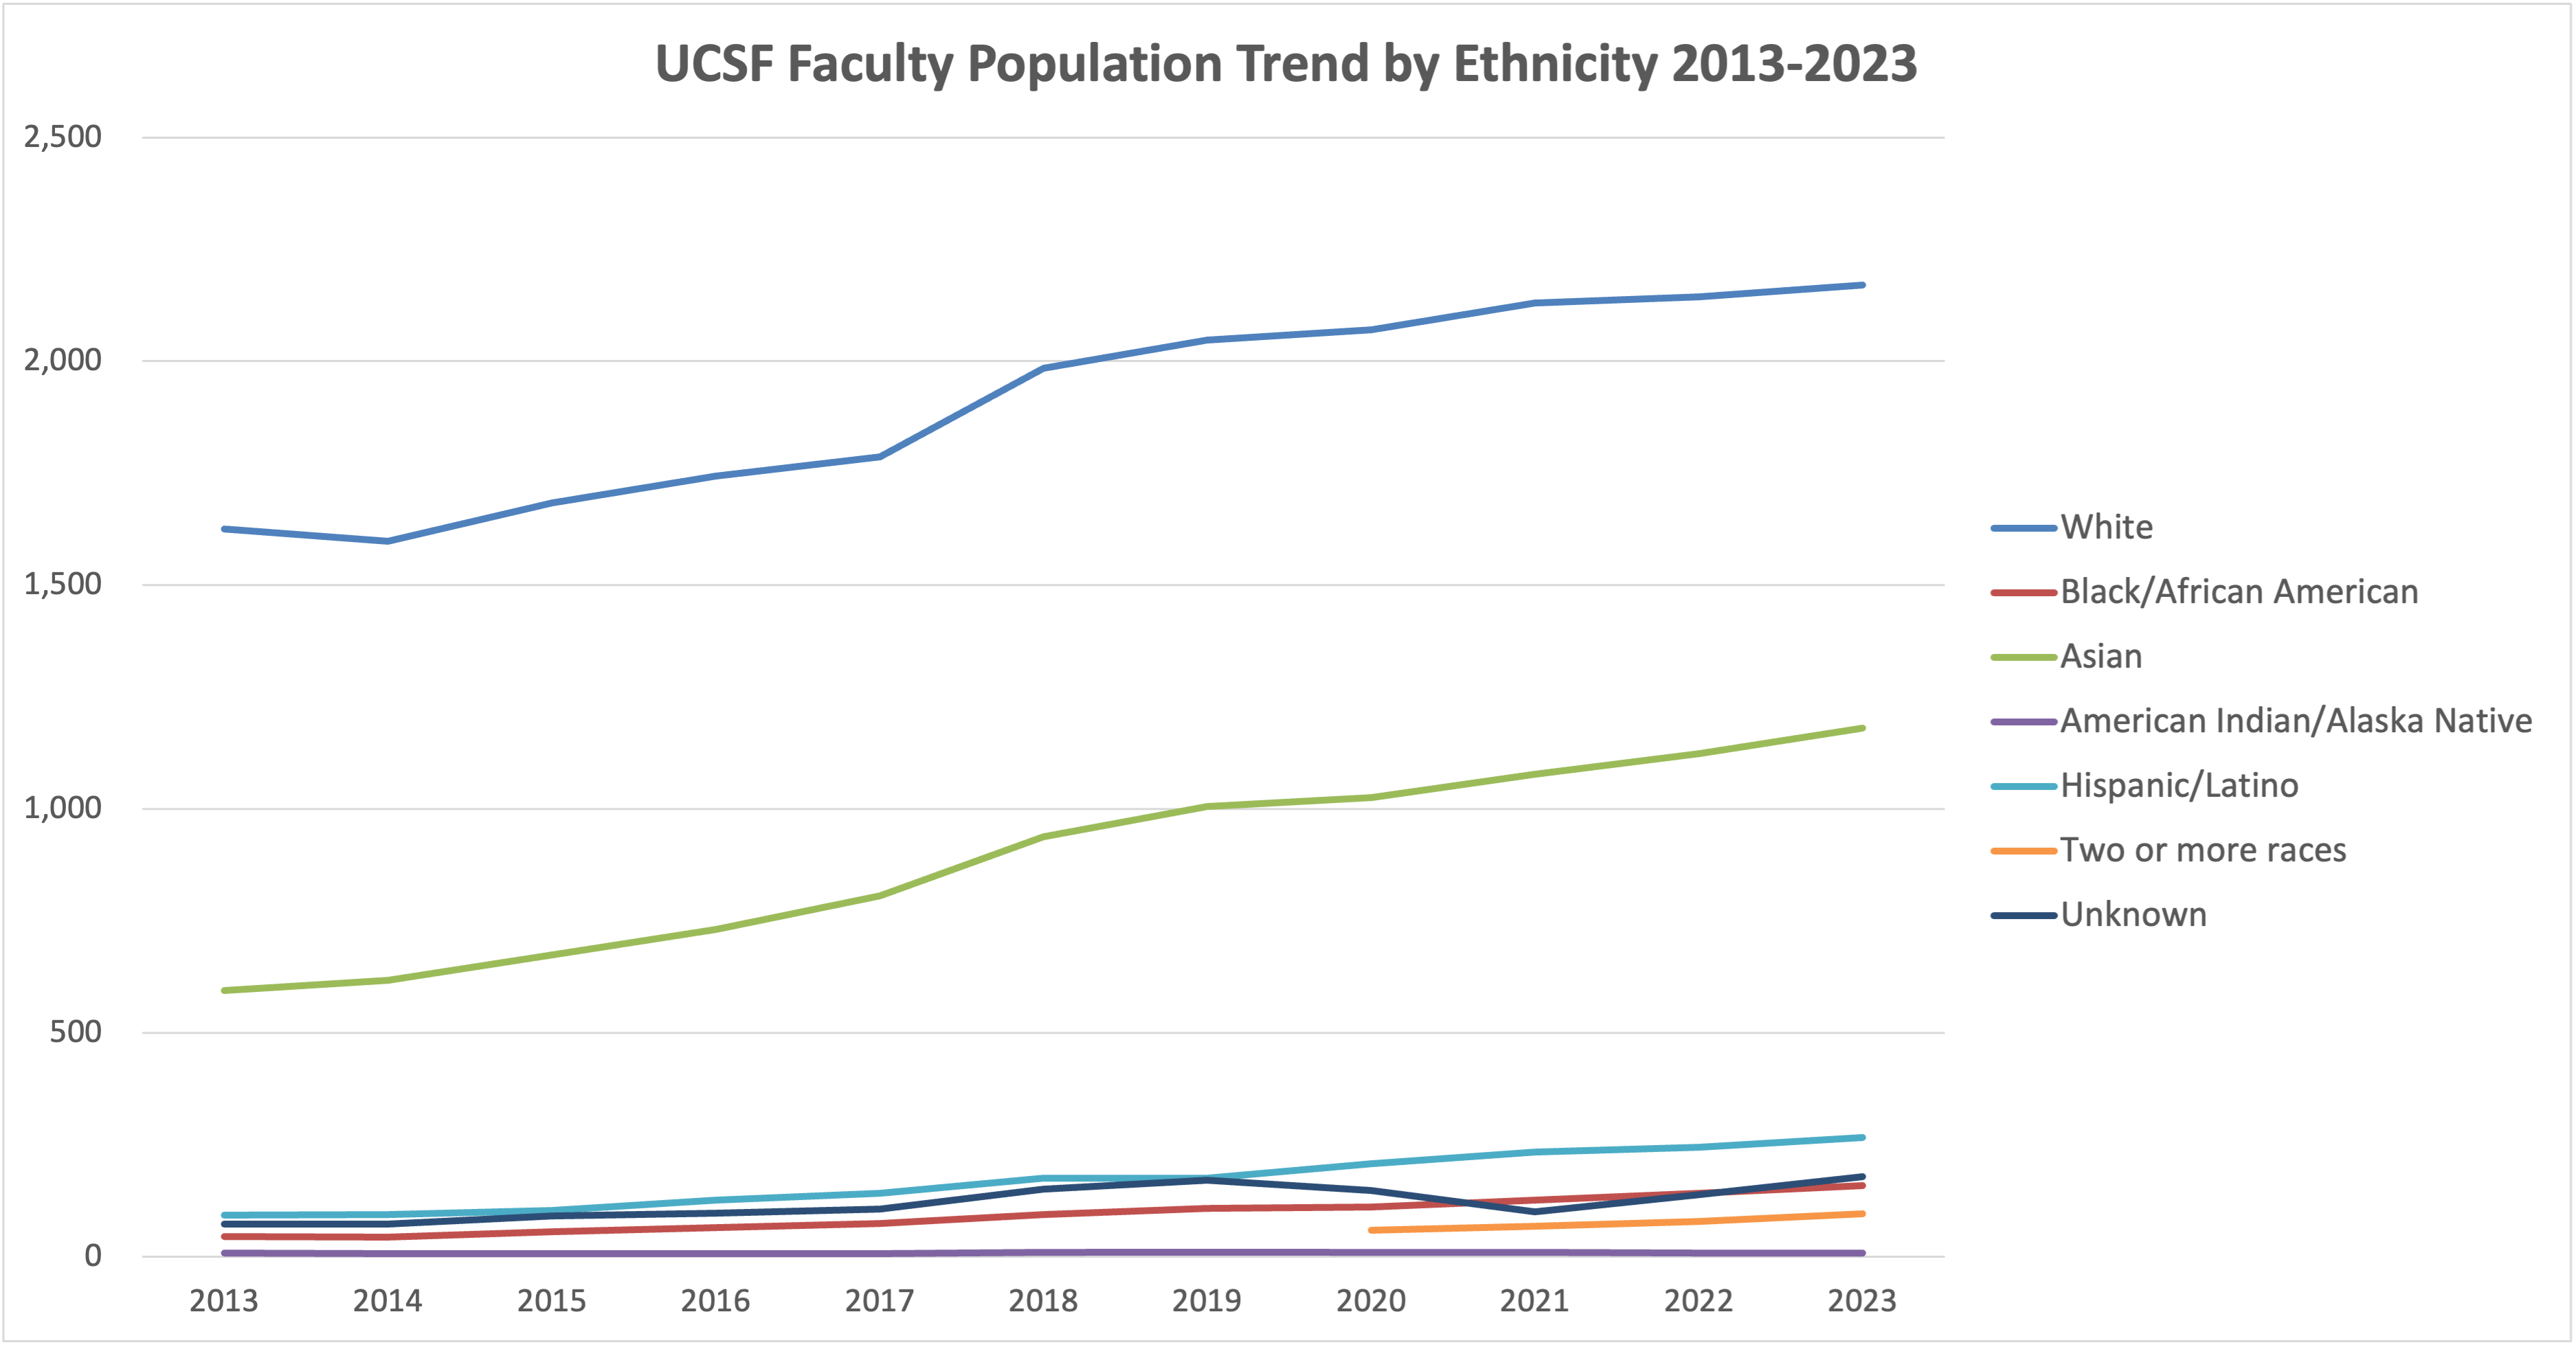 UCSF Facuty Population Trend by Ethnicity Line 2013-2023